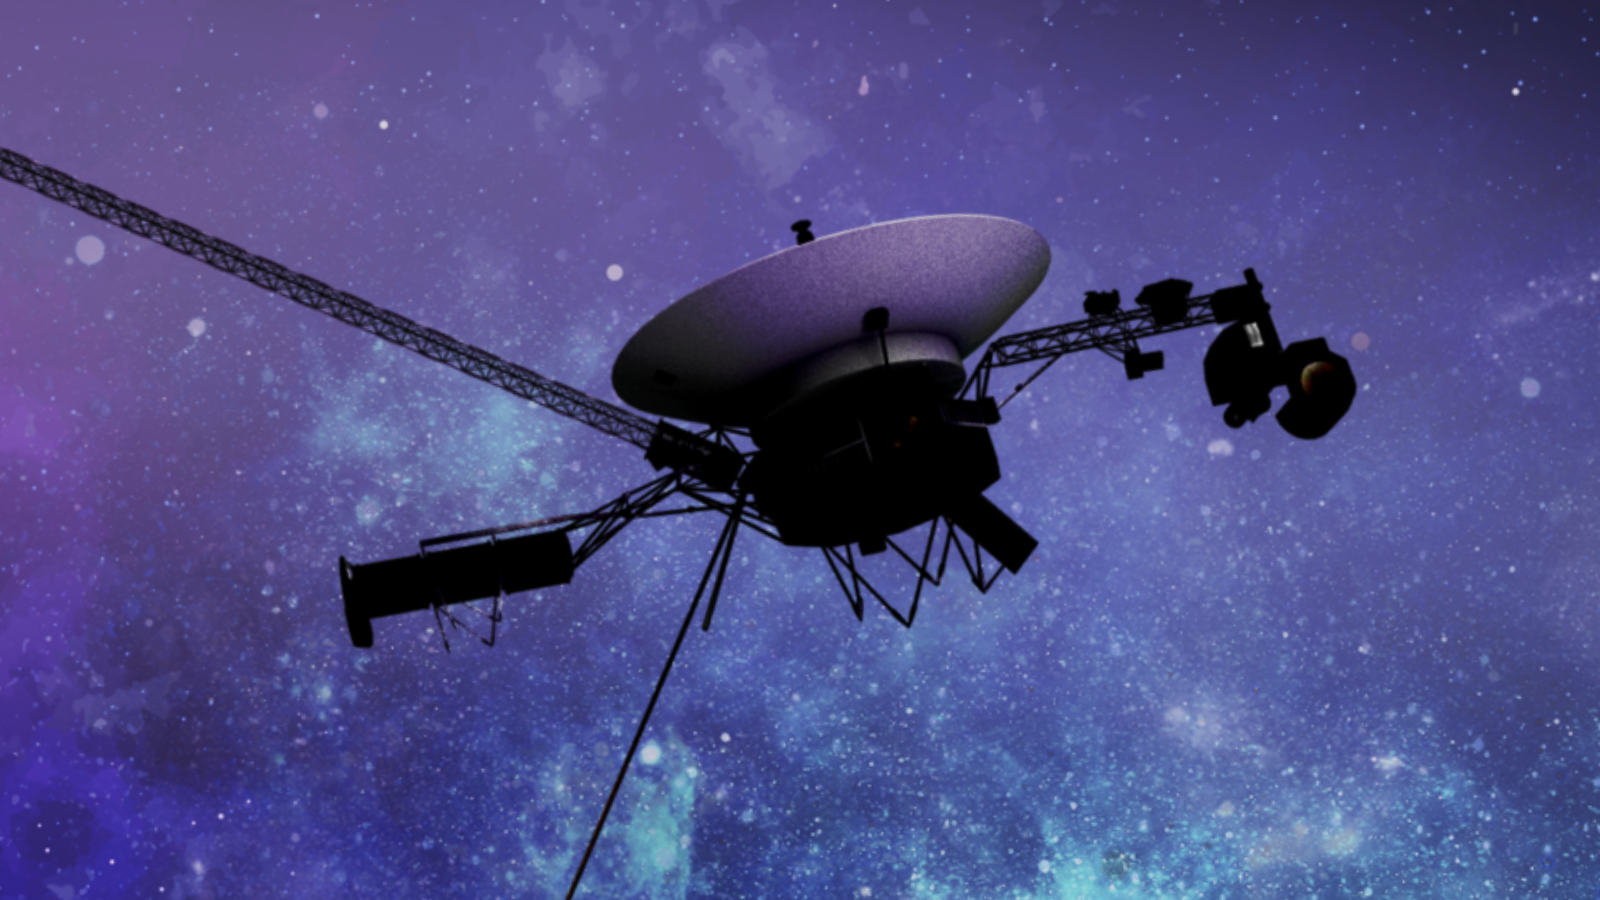 We finally know why NASA’s Voyager 1 spacecraft stopped communicating — scientists are working on a fix Space